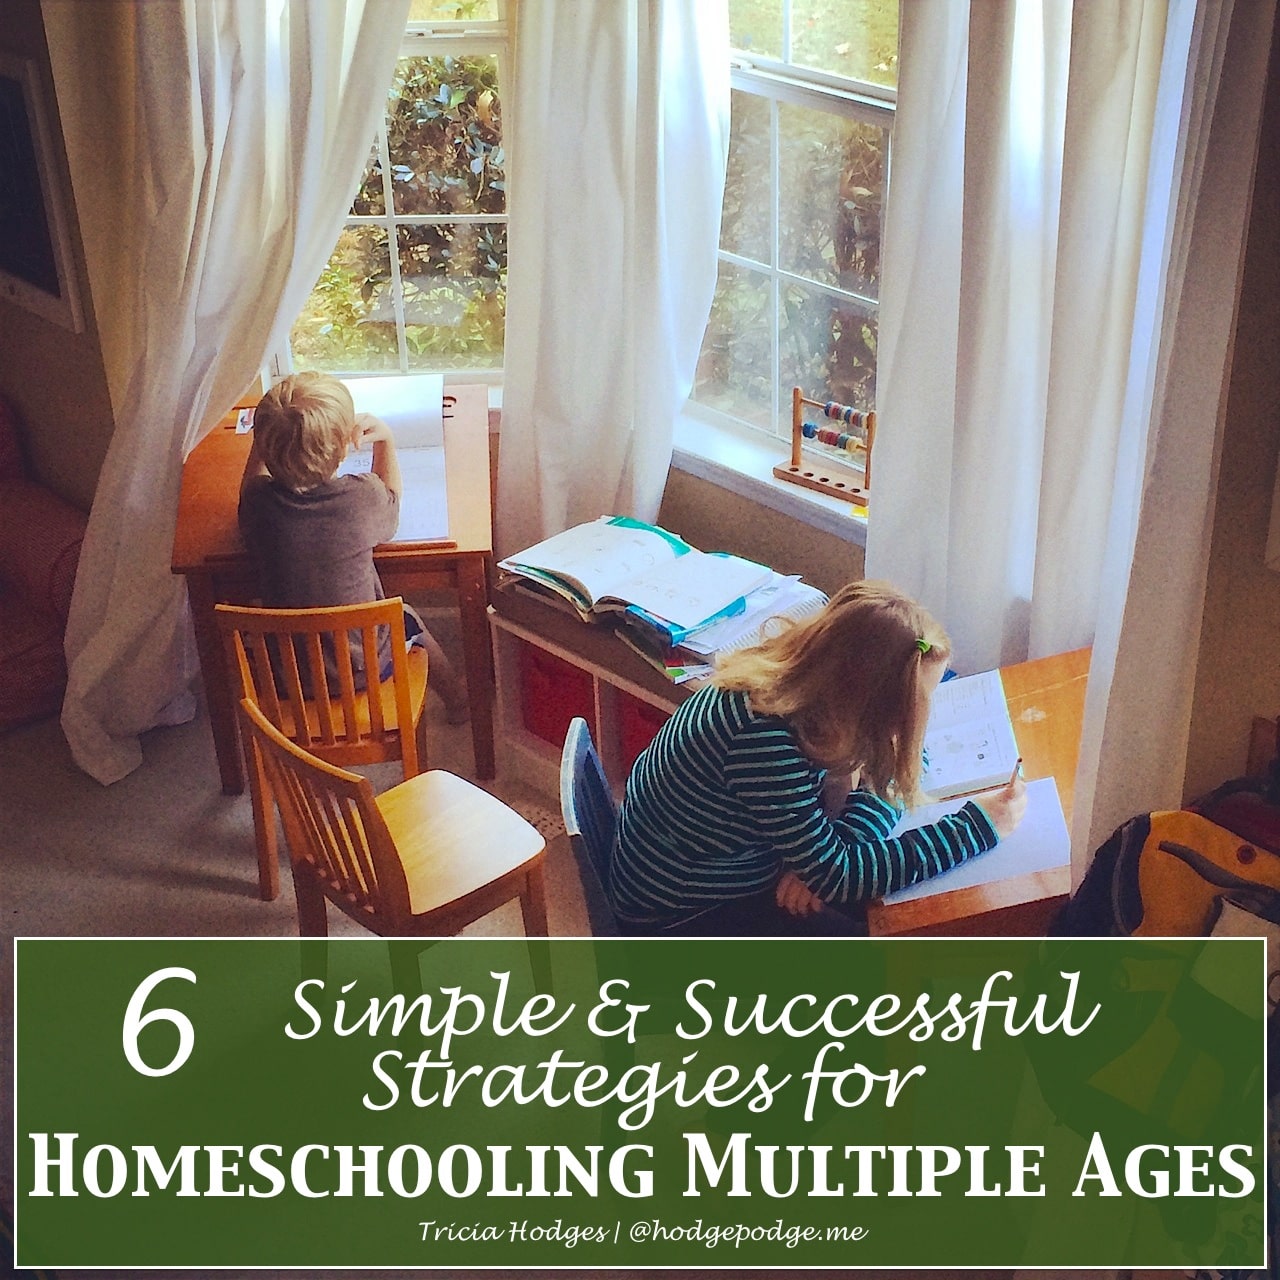 6 Simple Successful Strategies for Homeschooling a House Full